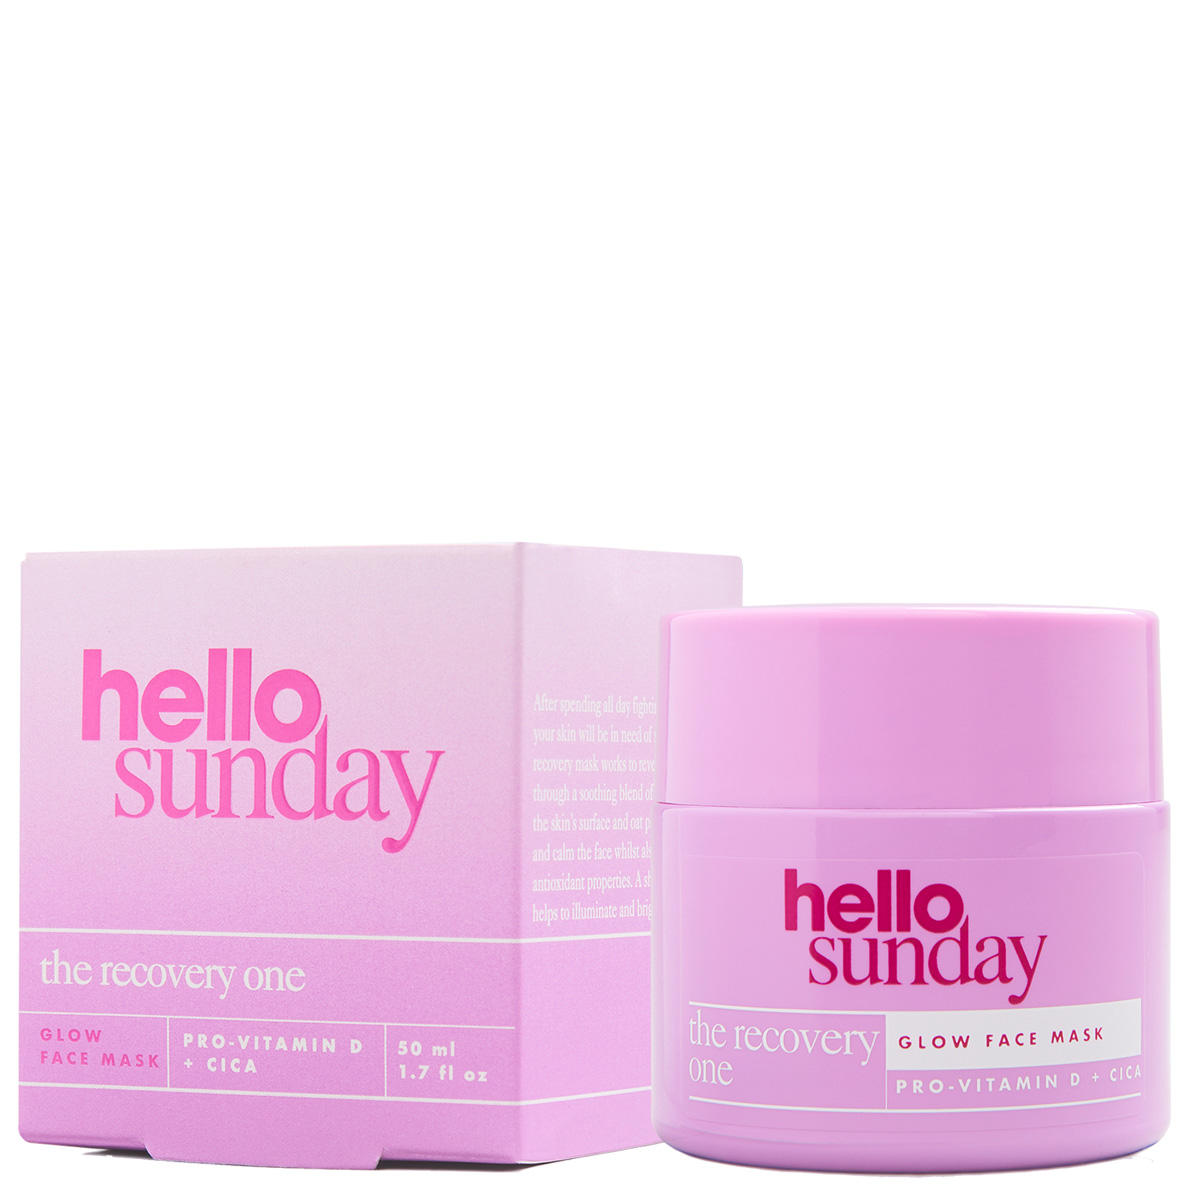 hello sunday the recovery one Glow face mask 50 ml - 3